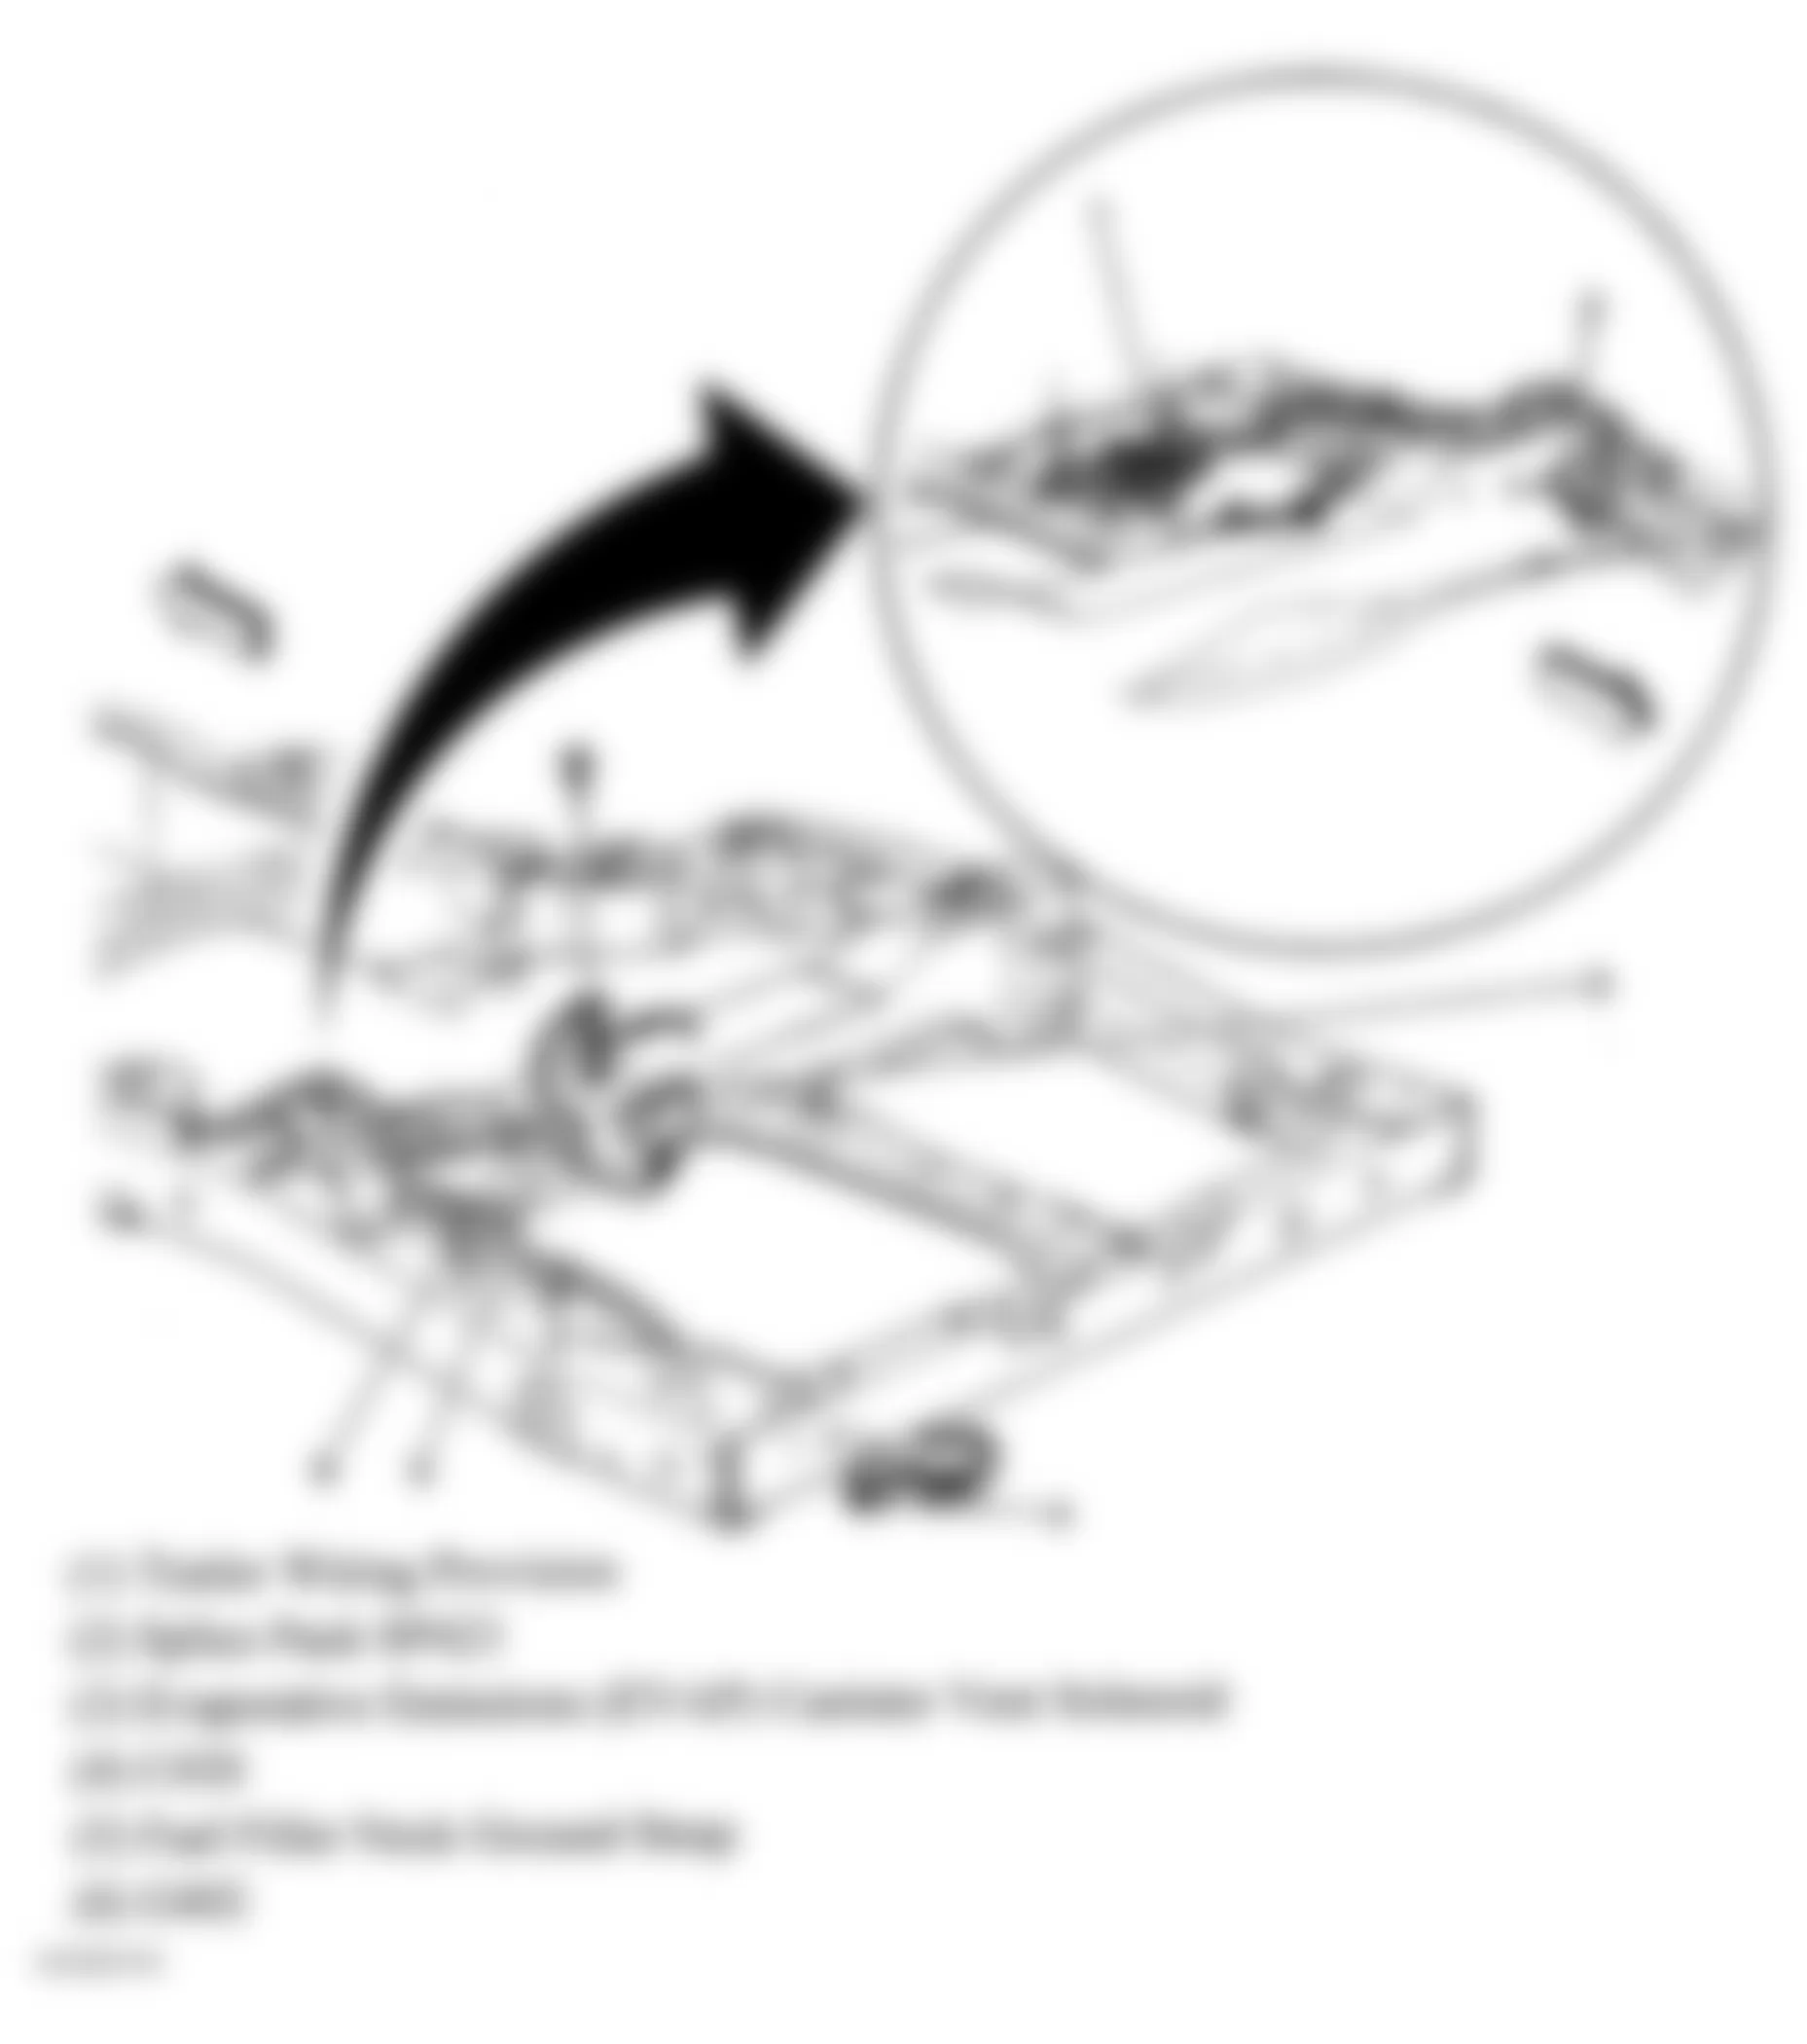 GMC Sonoma 2004 - Component Locations -  Rear Of Frame (4 Door Utility)